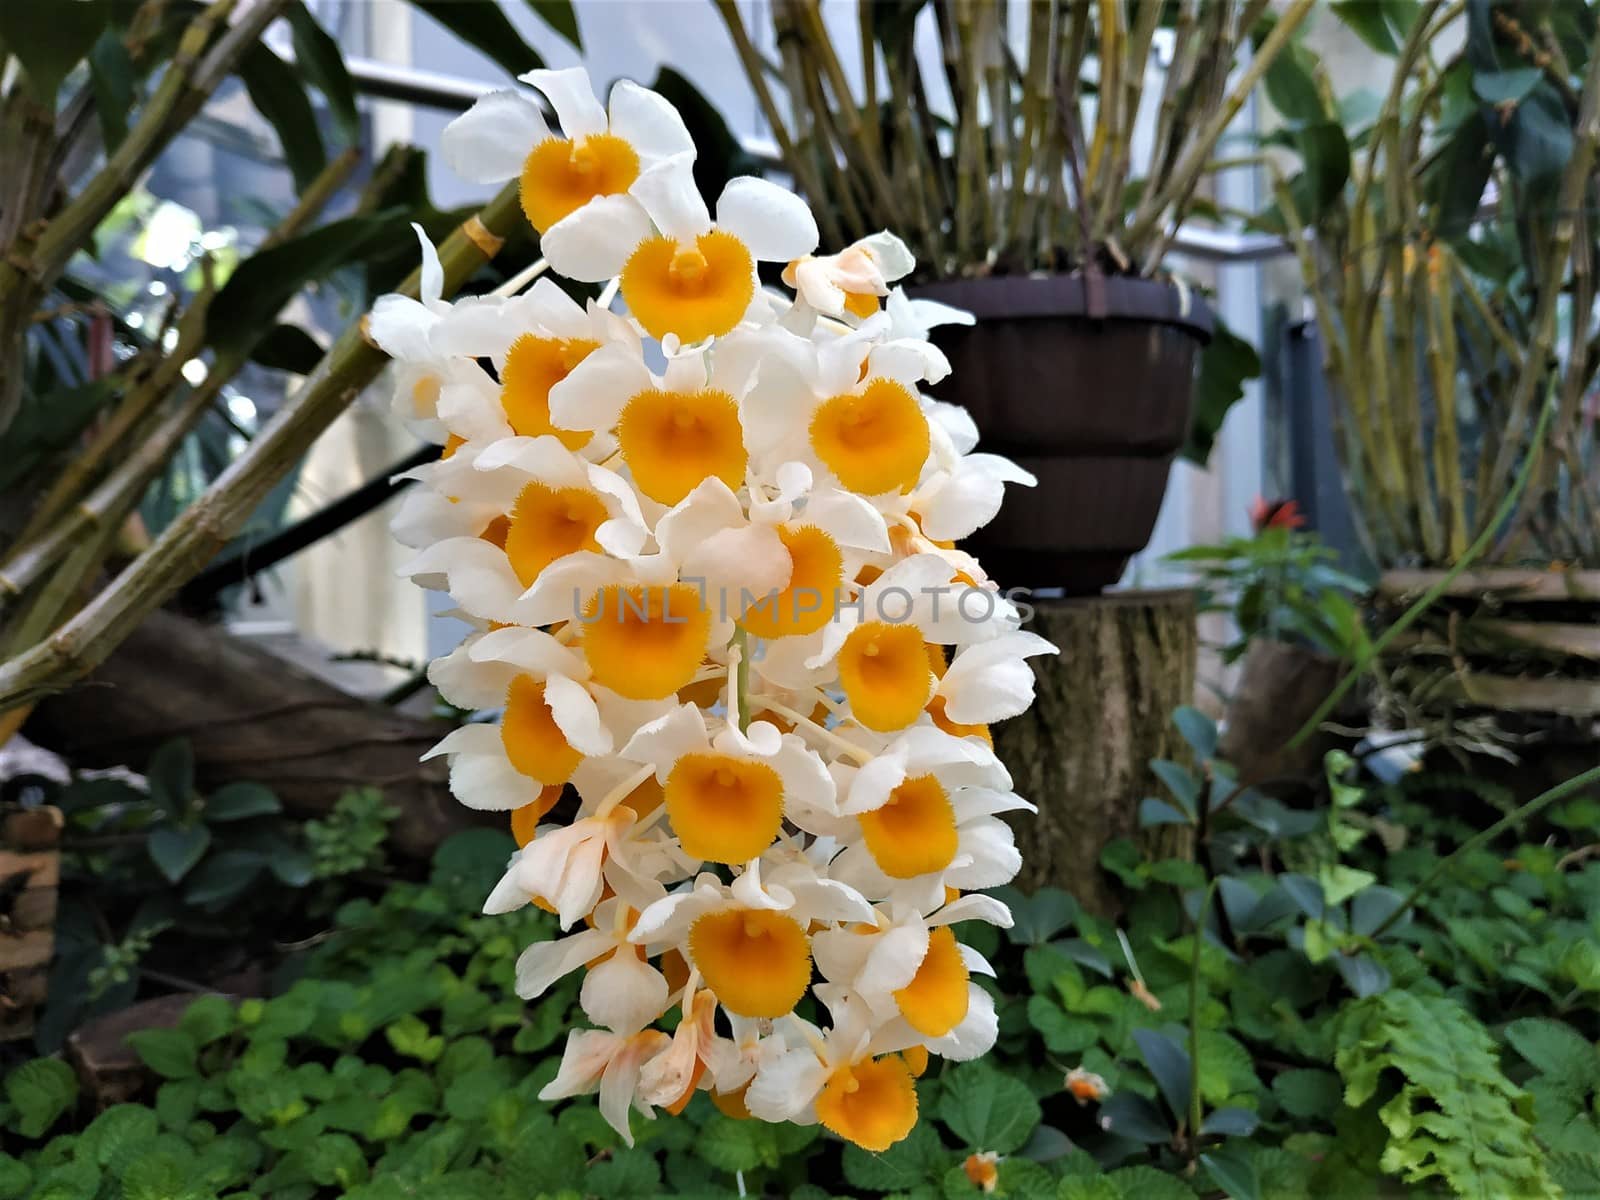 Blooming Dendrobium thyrsiflorum spotted in a green house